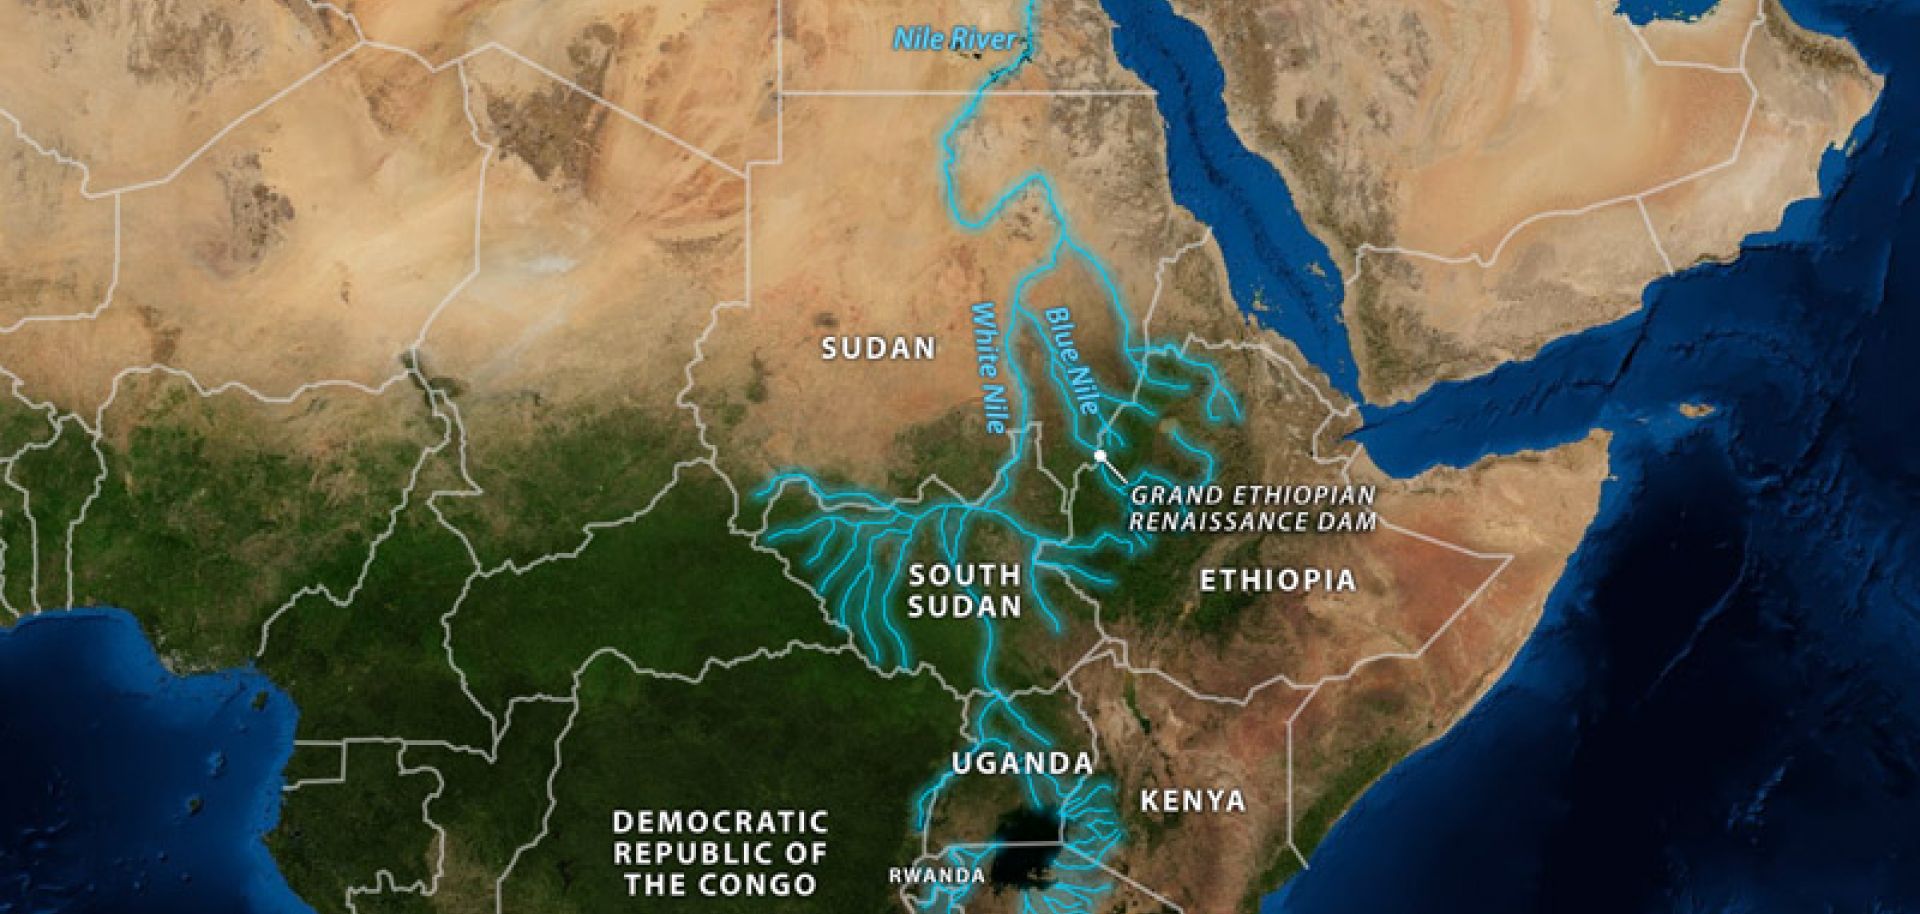 The Geopolitical Impact of the Nile